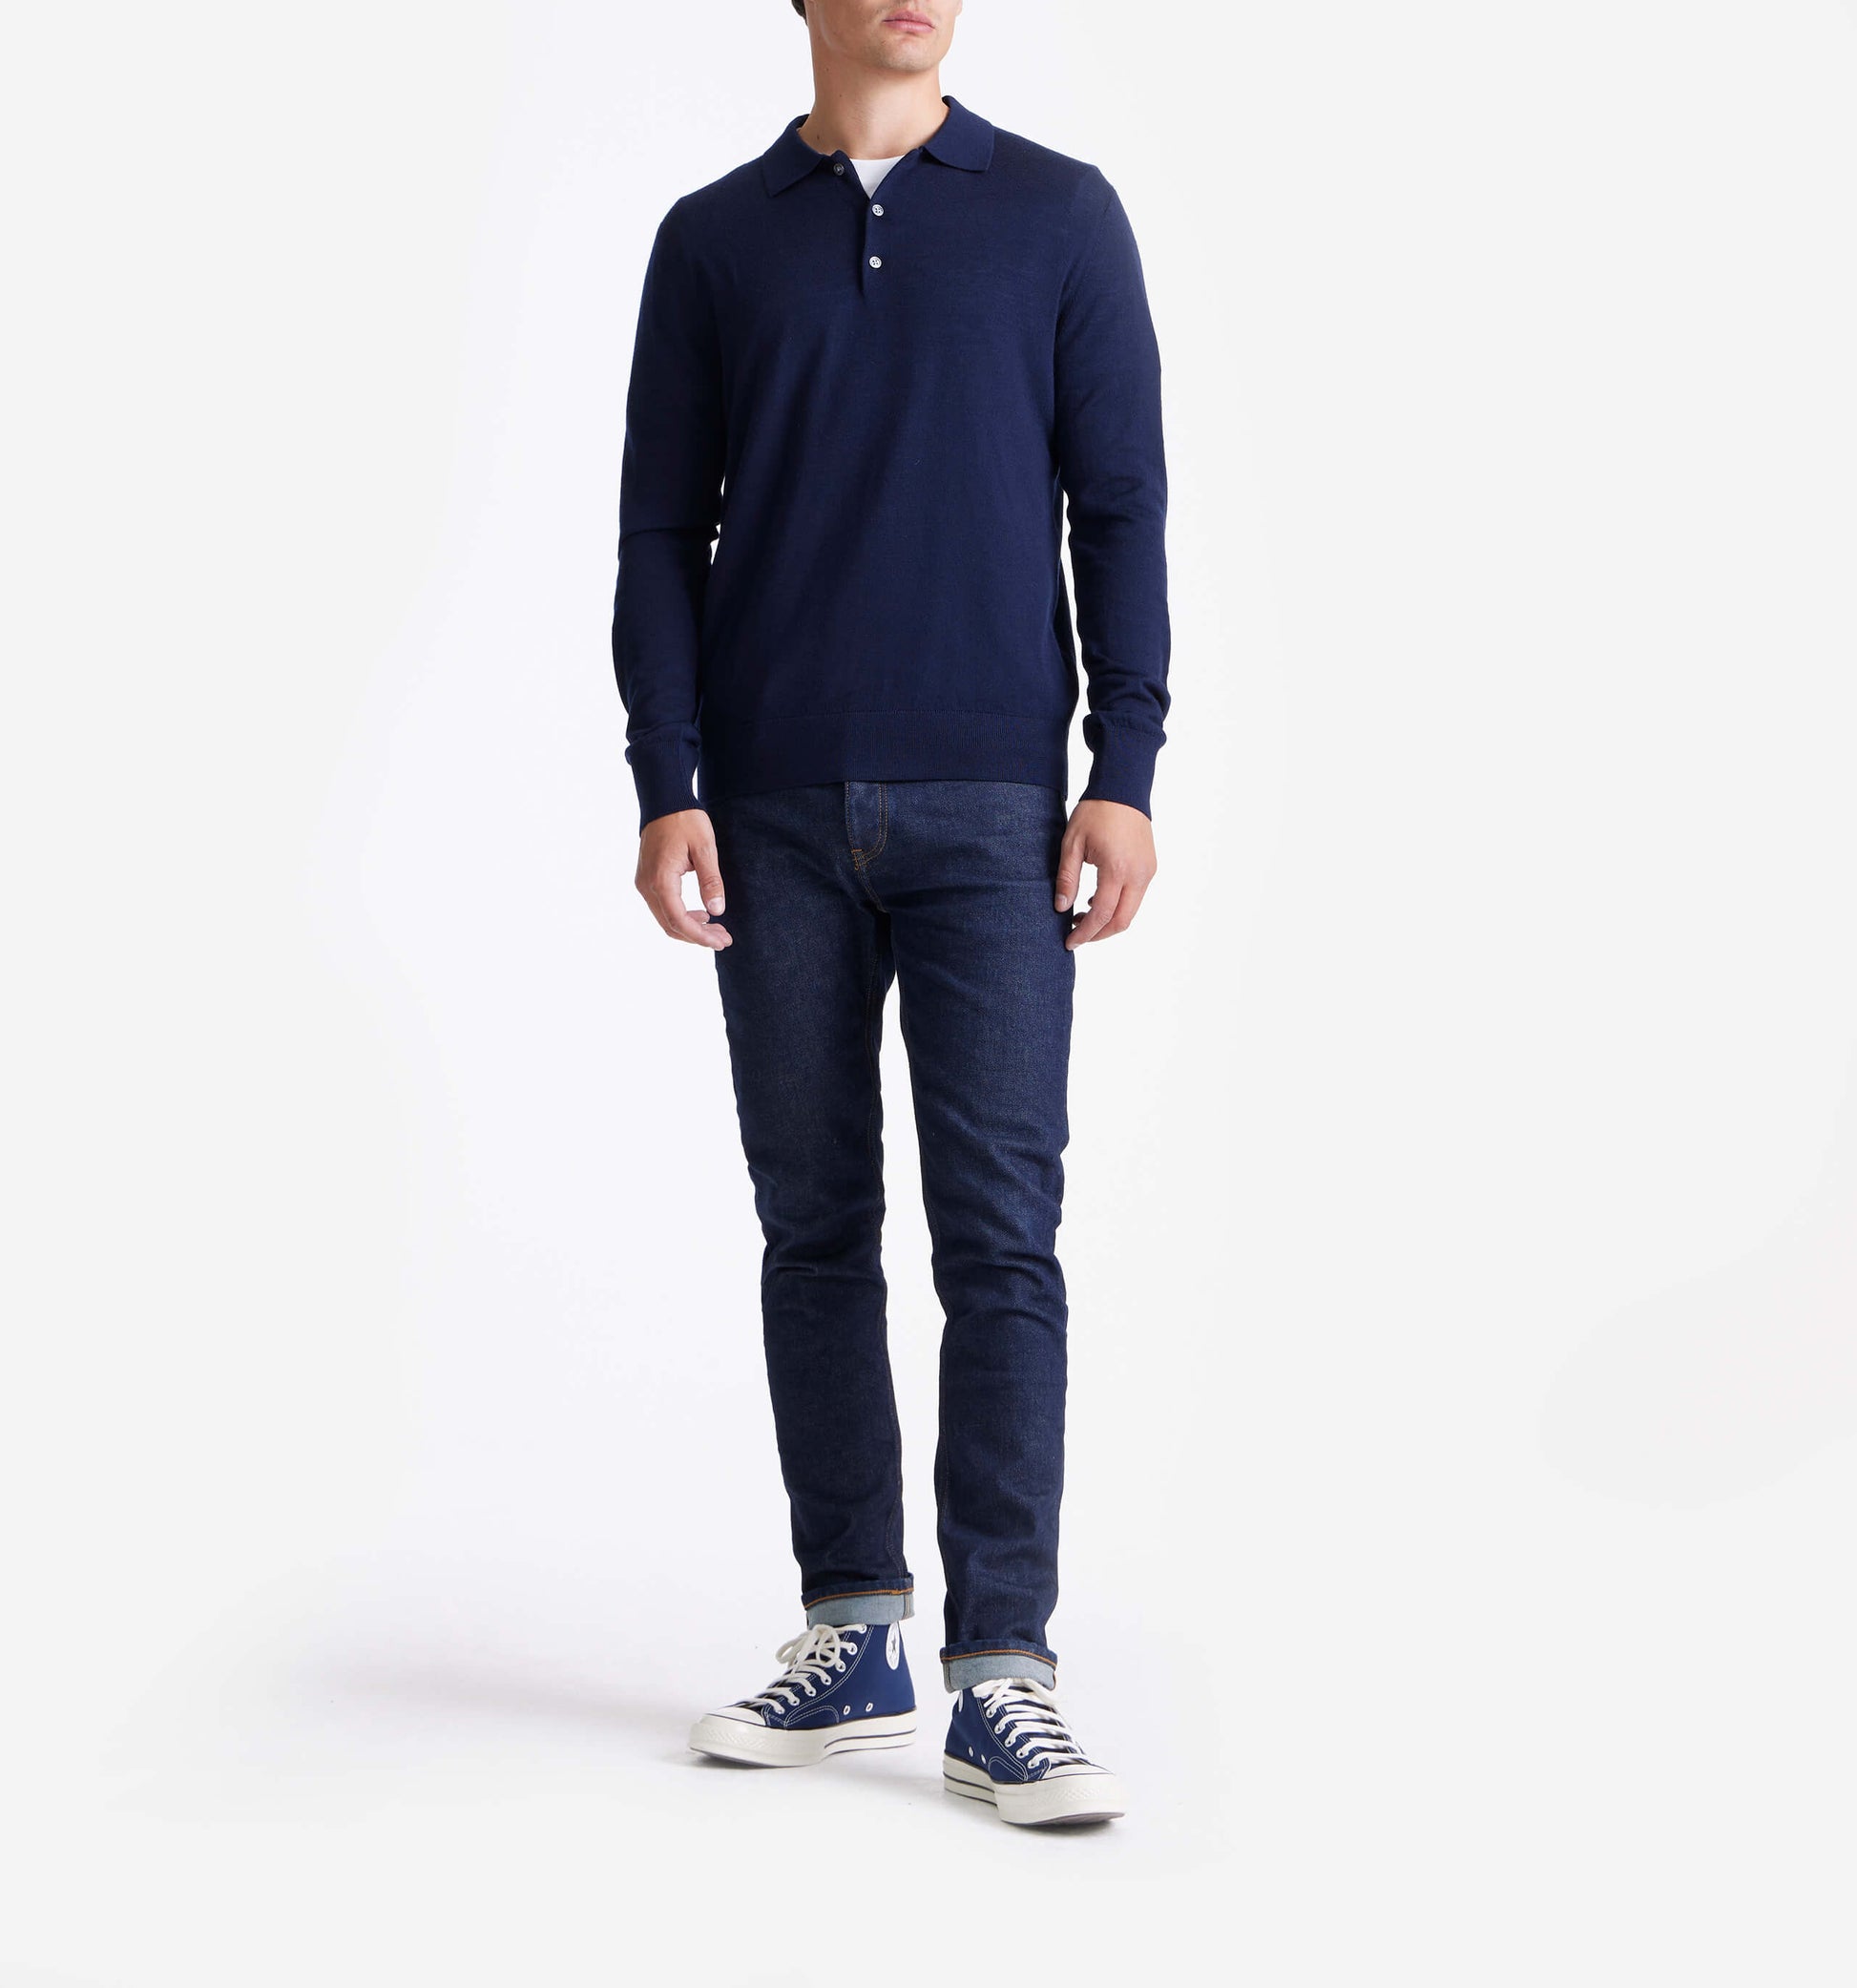 The Robert - Merino Wool Polo In Navy From King Essentials